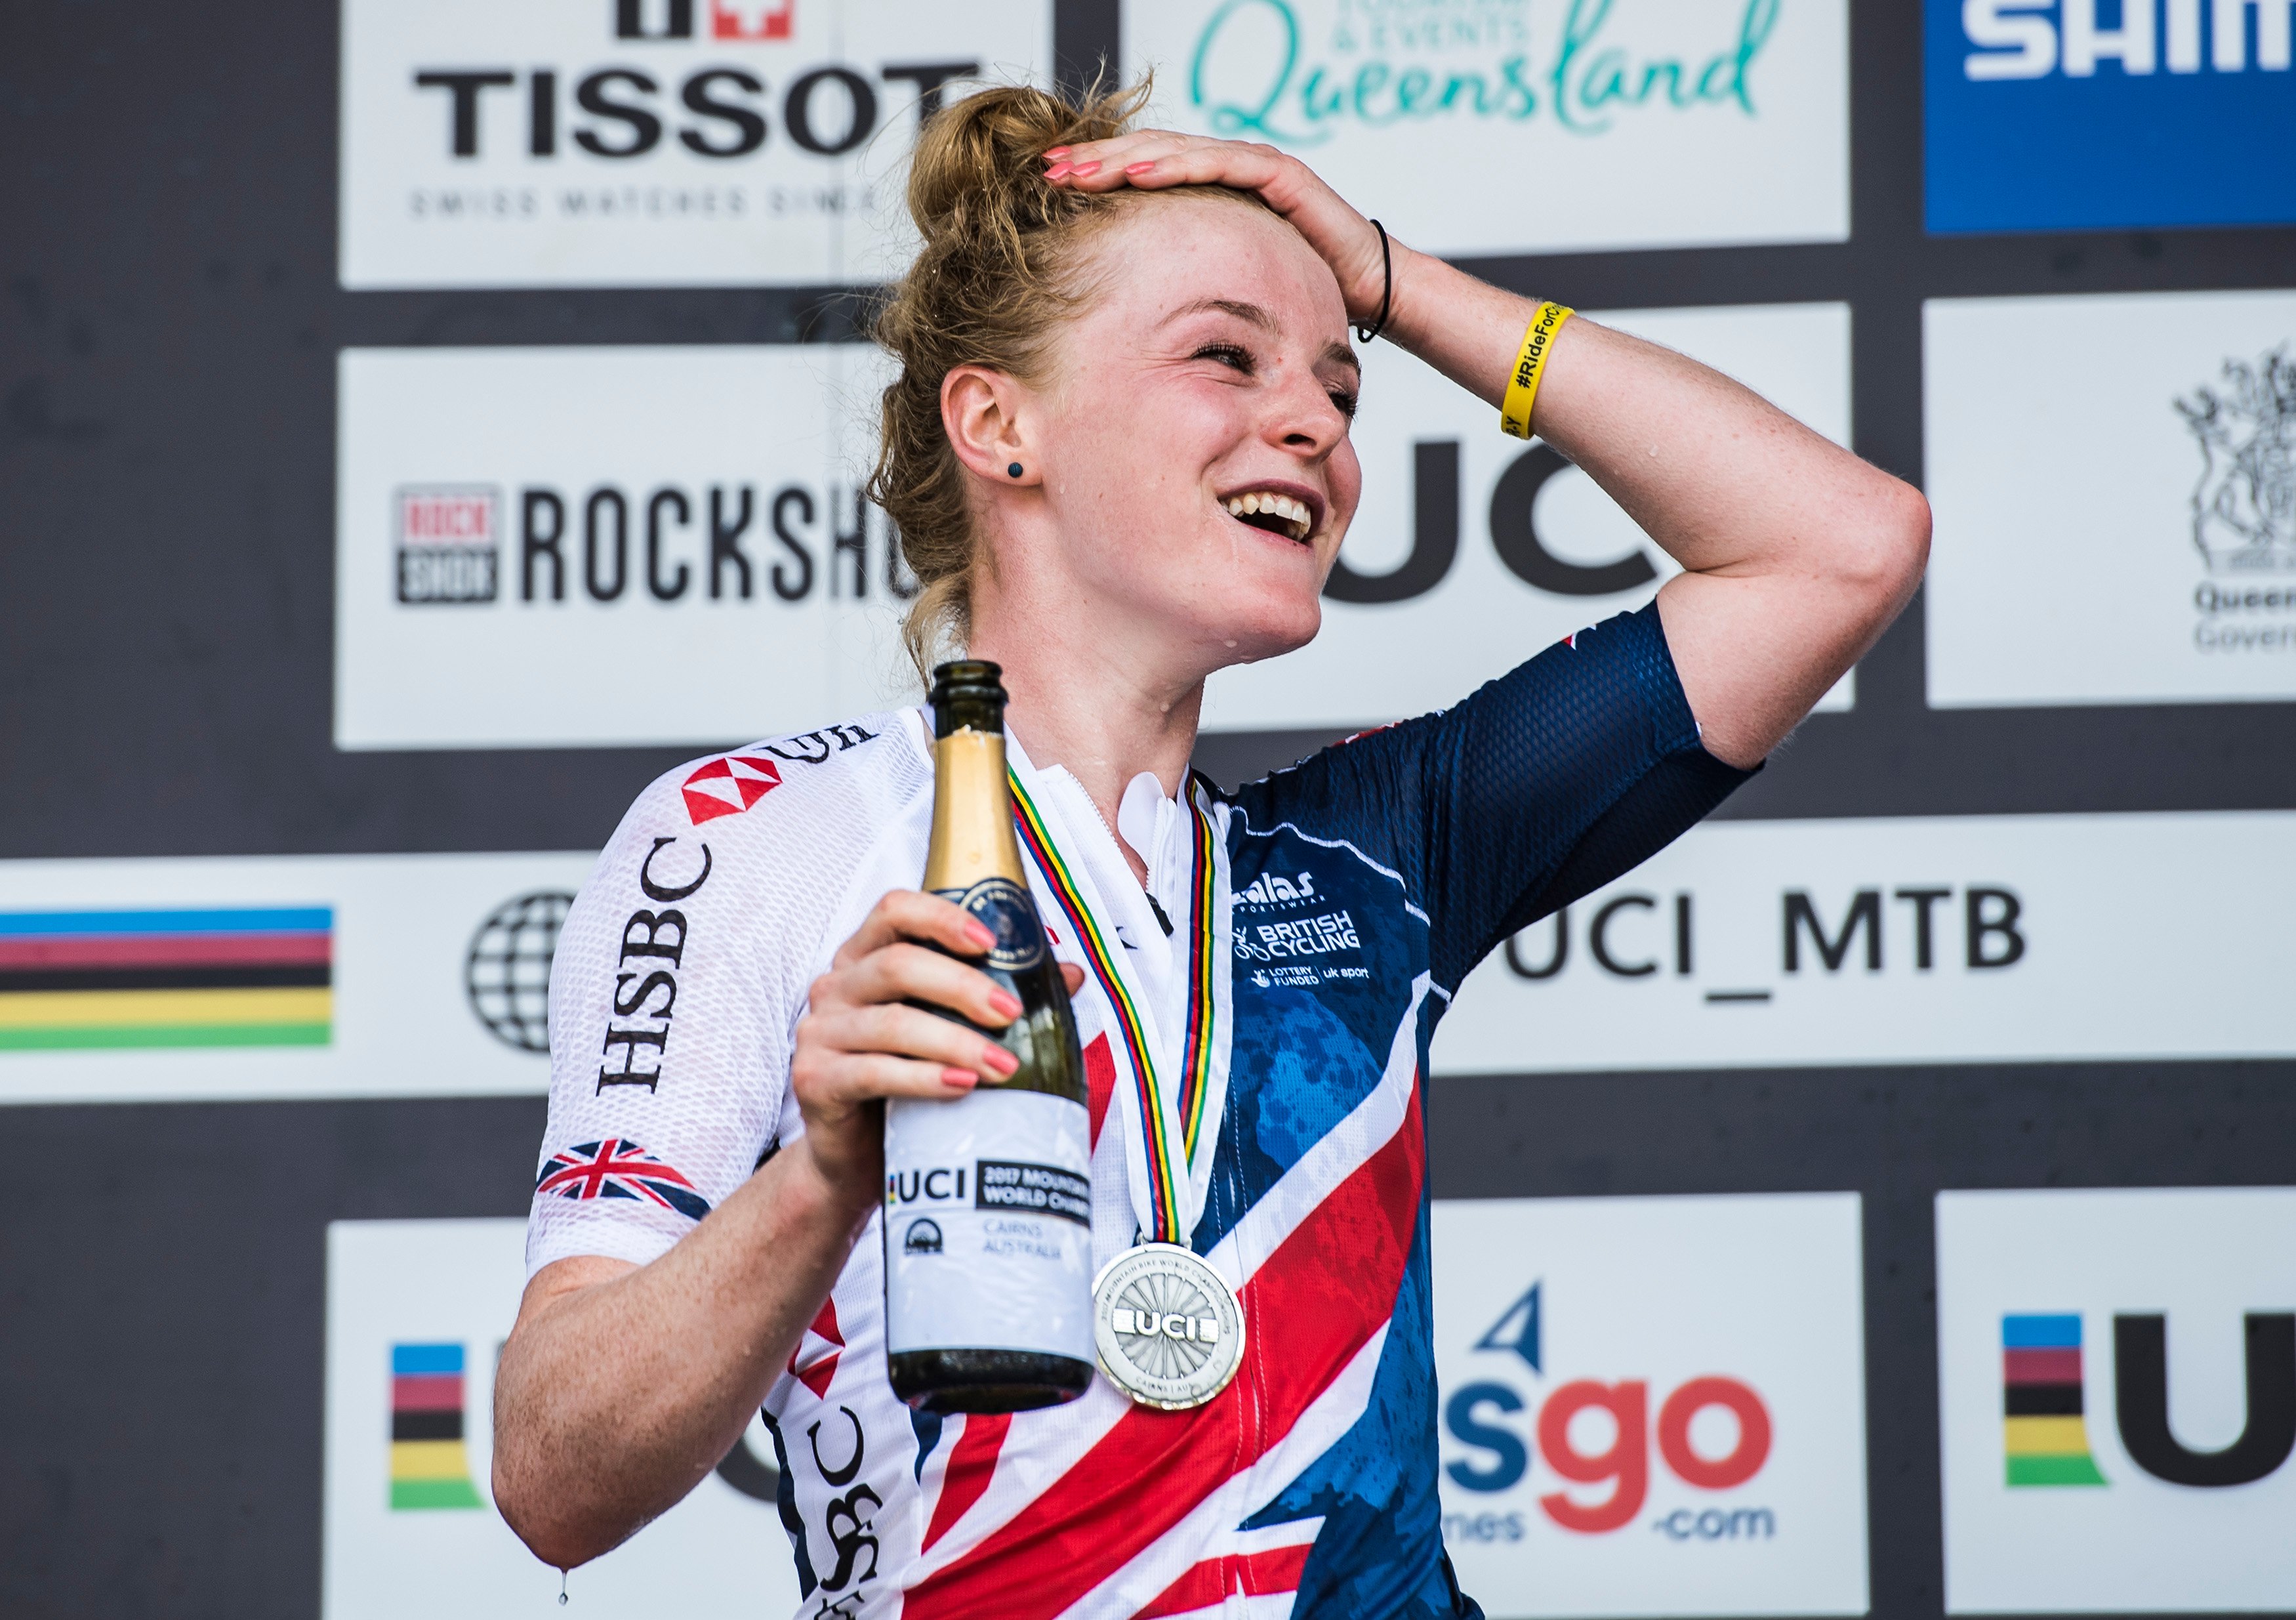 Annie Last won Great Britain’s first ever medal in elite women’s cross-country at the UCI Mountain Bike World Championships